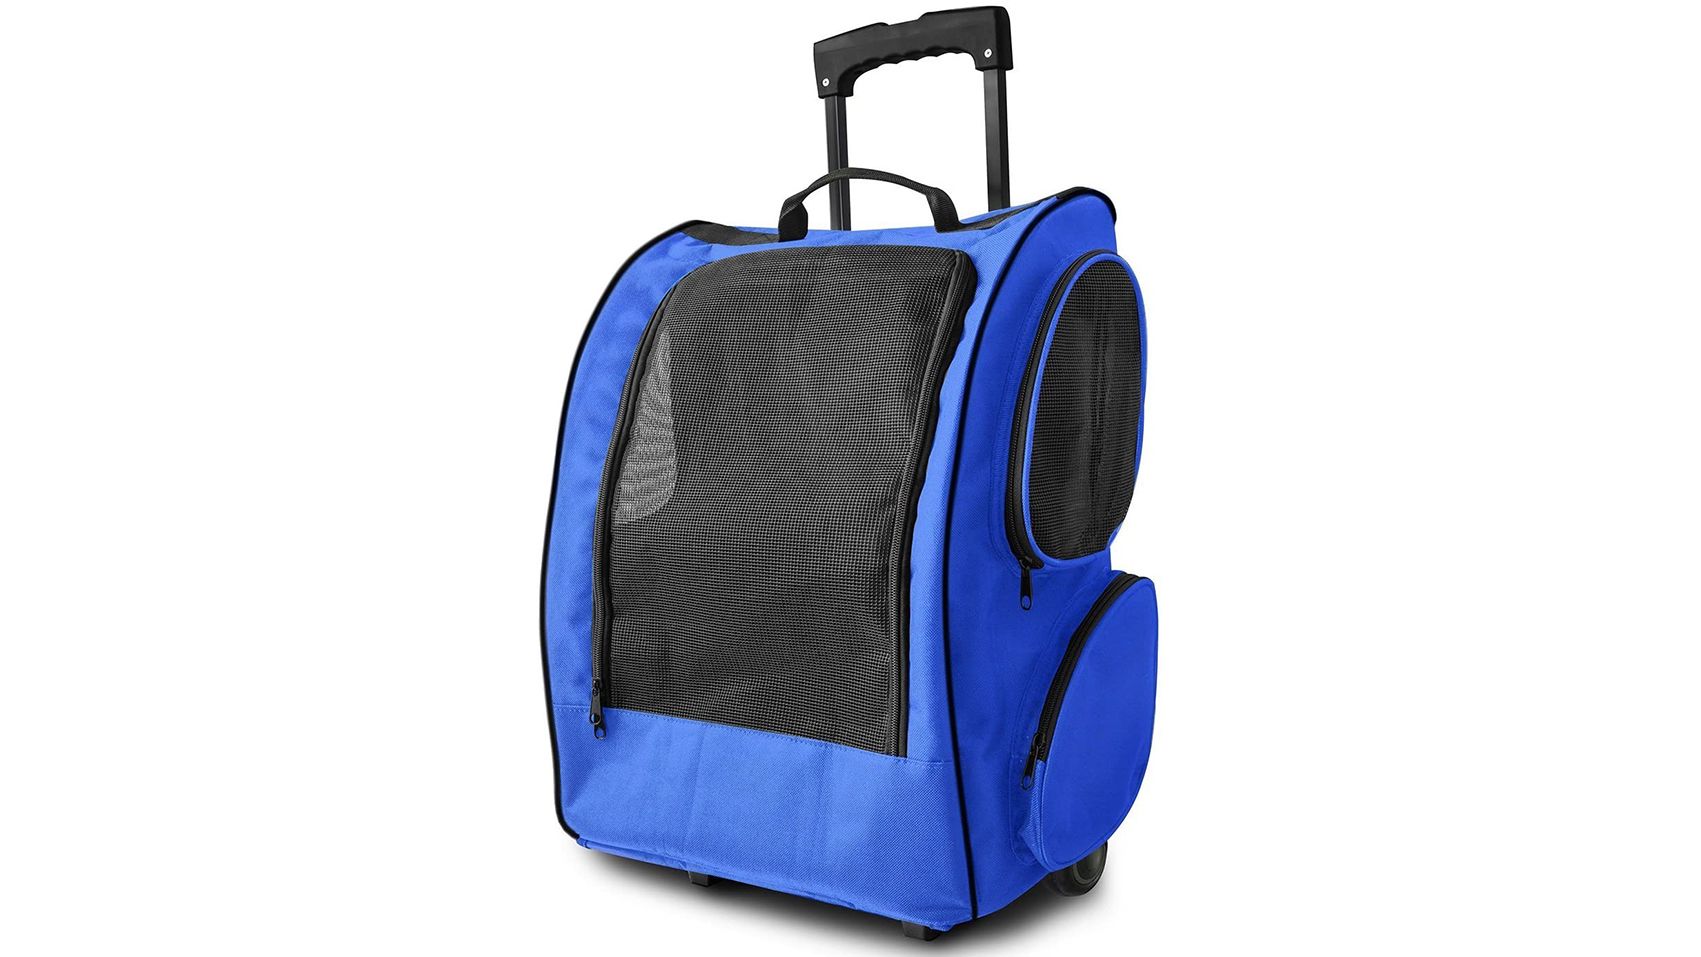 Paws & Pals Pet Carrier Airline Approved Soft-Sided Dogs Cats